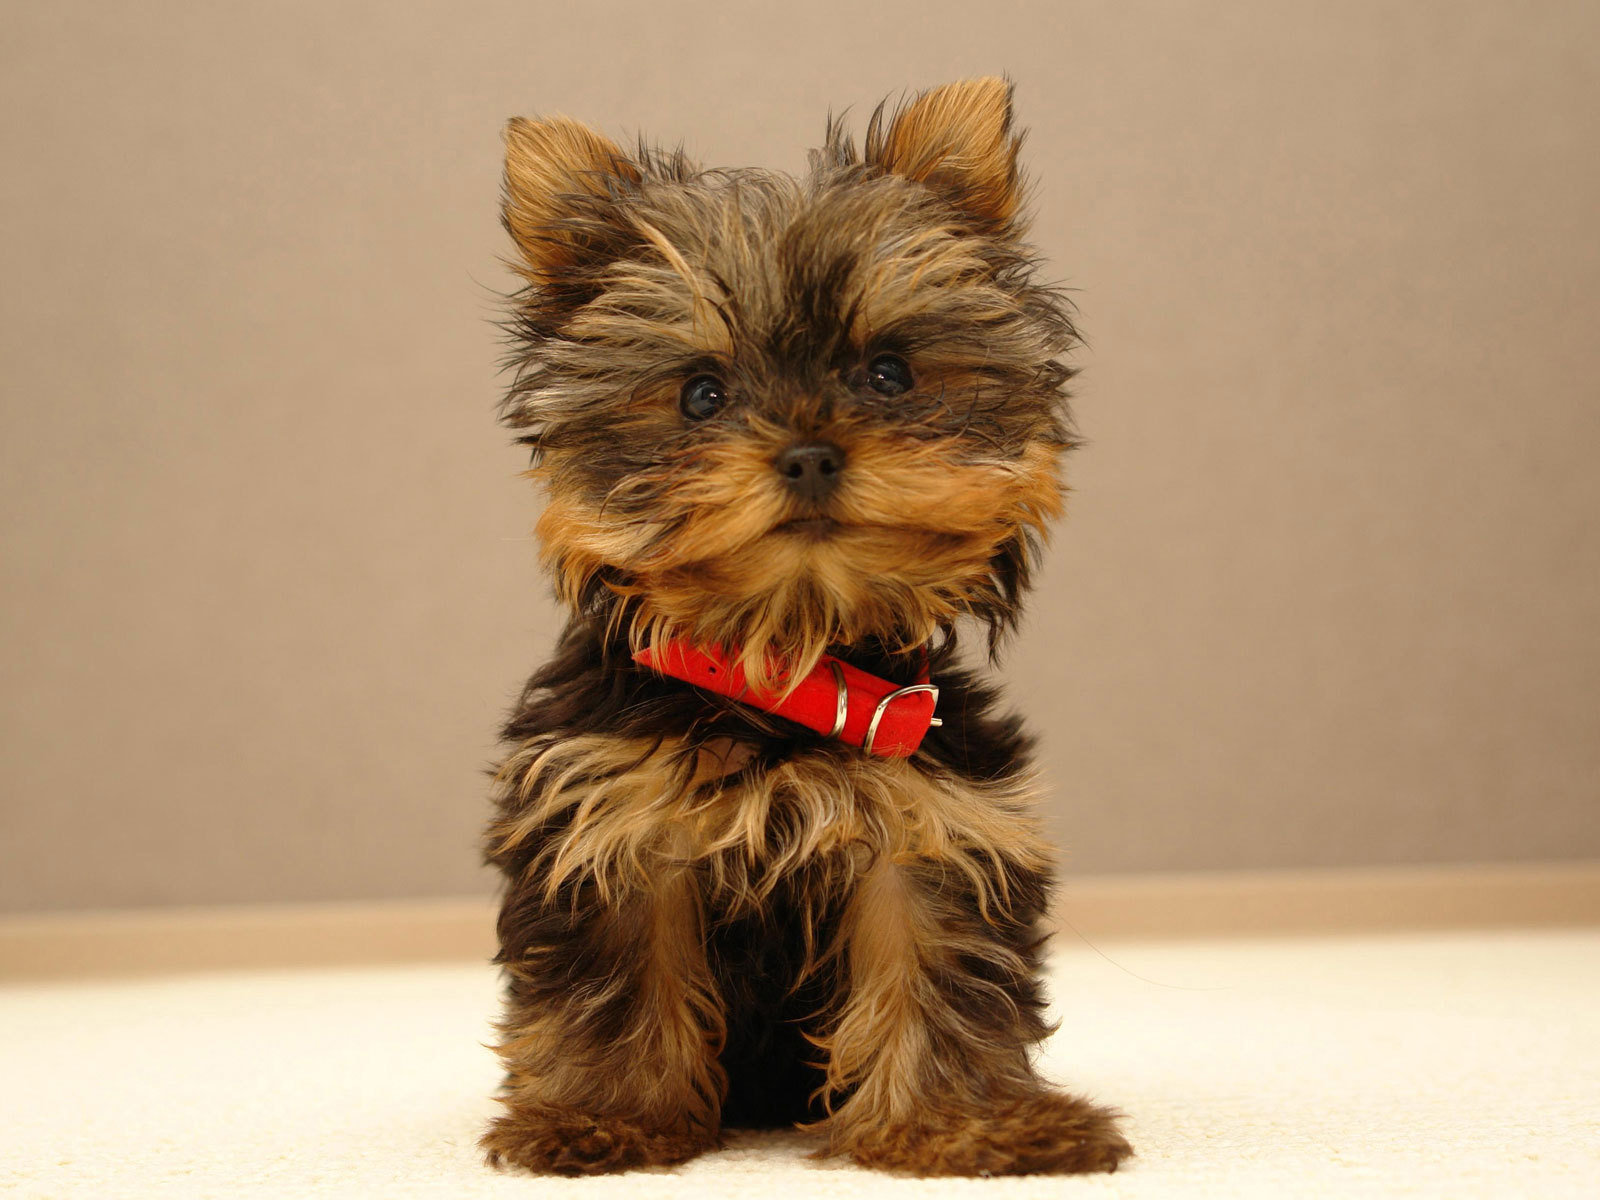 Cute puppy wallpapers Cute puppy stock photos